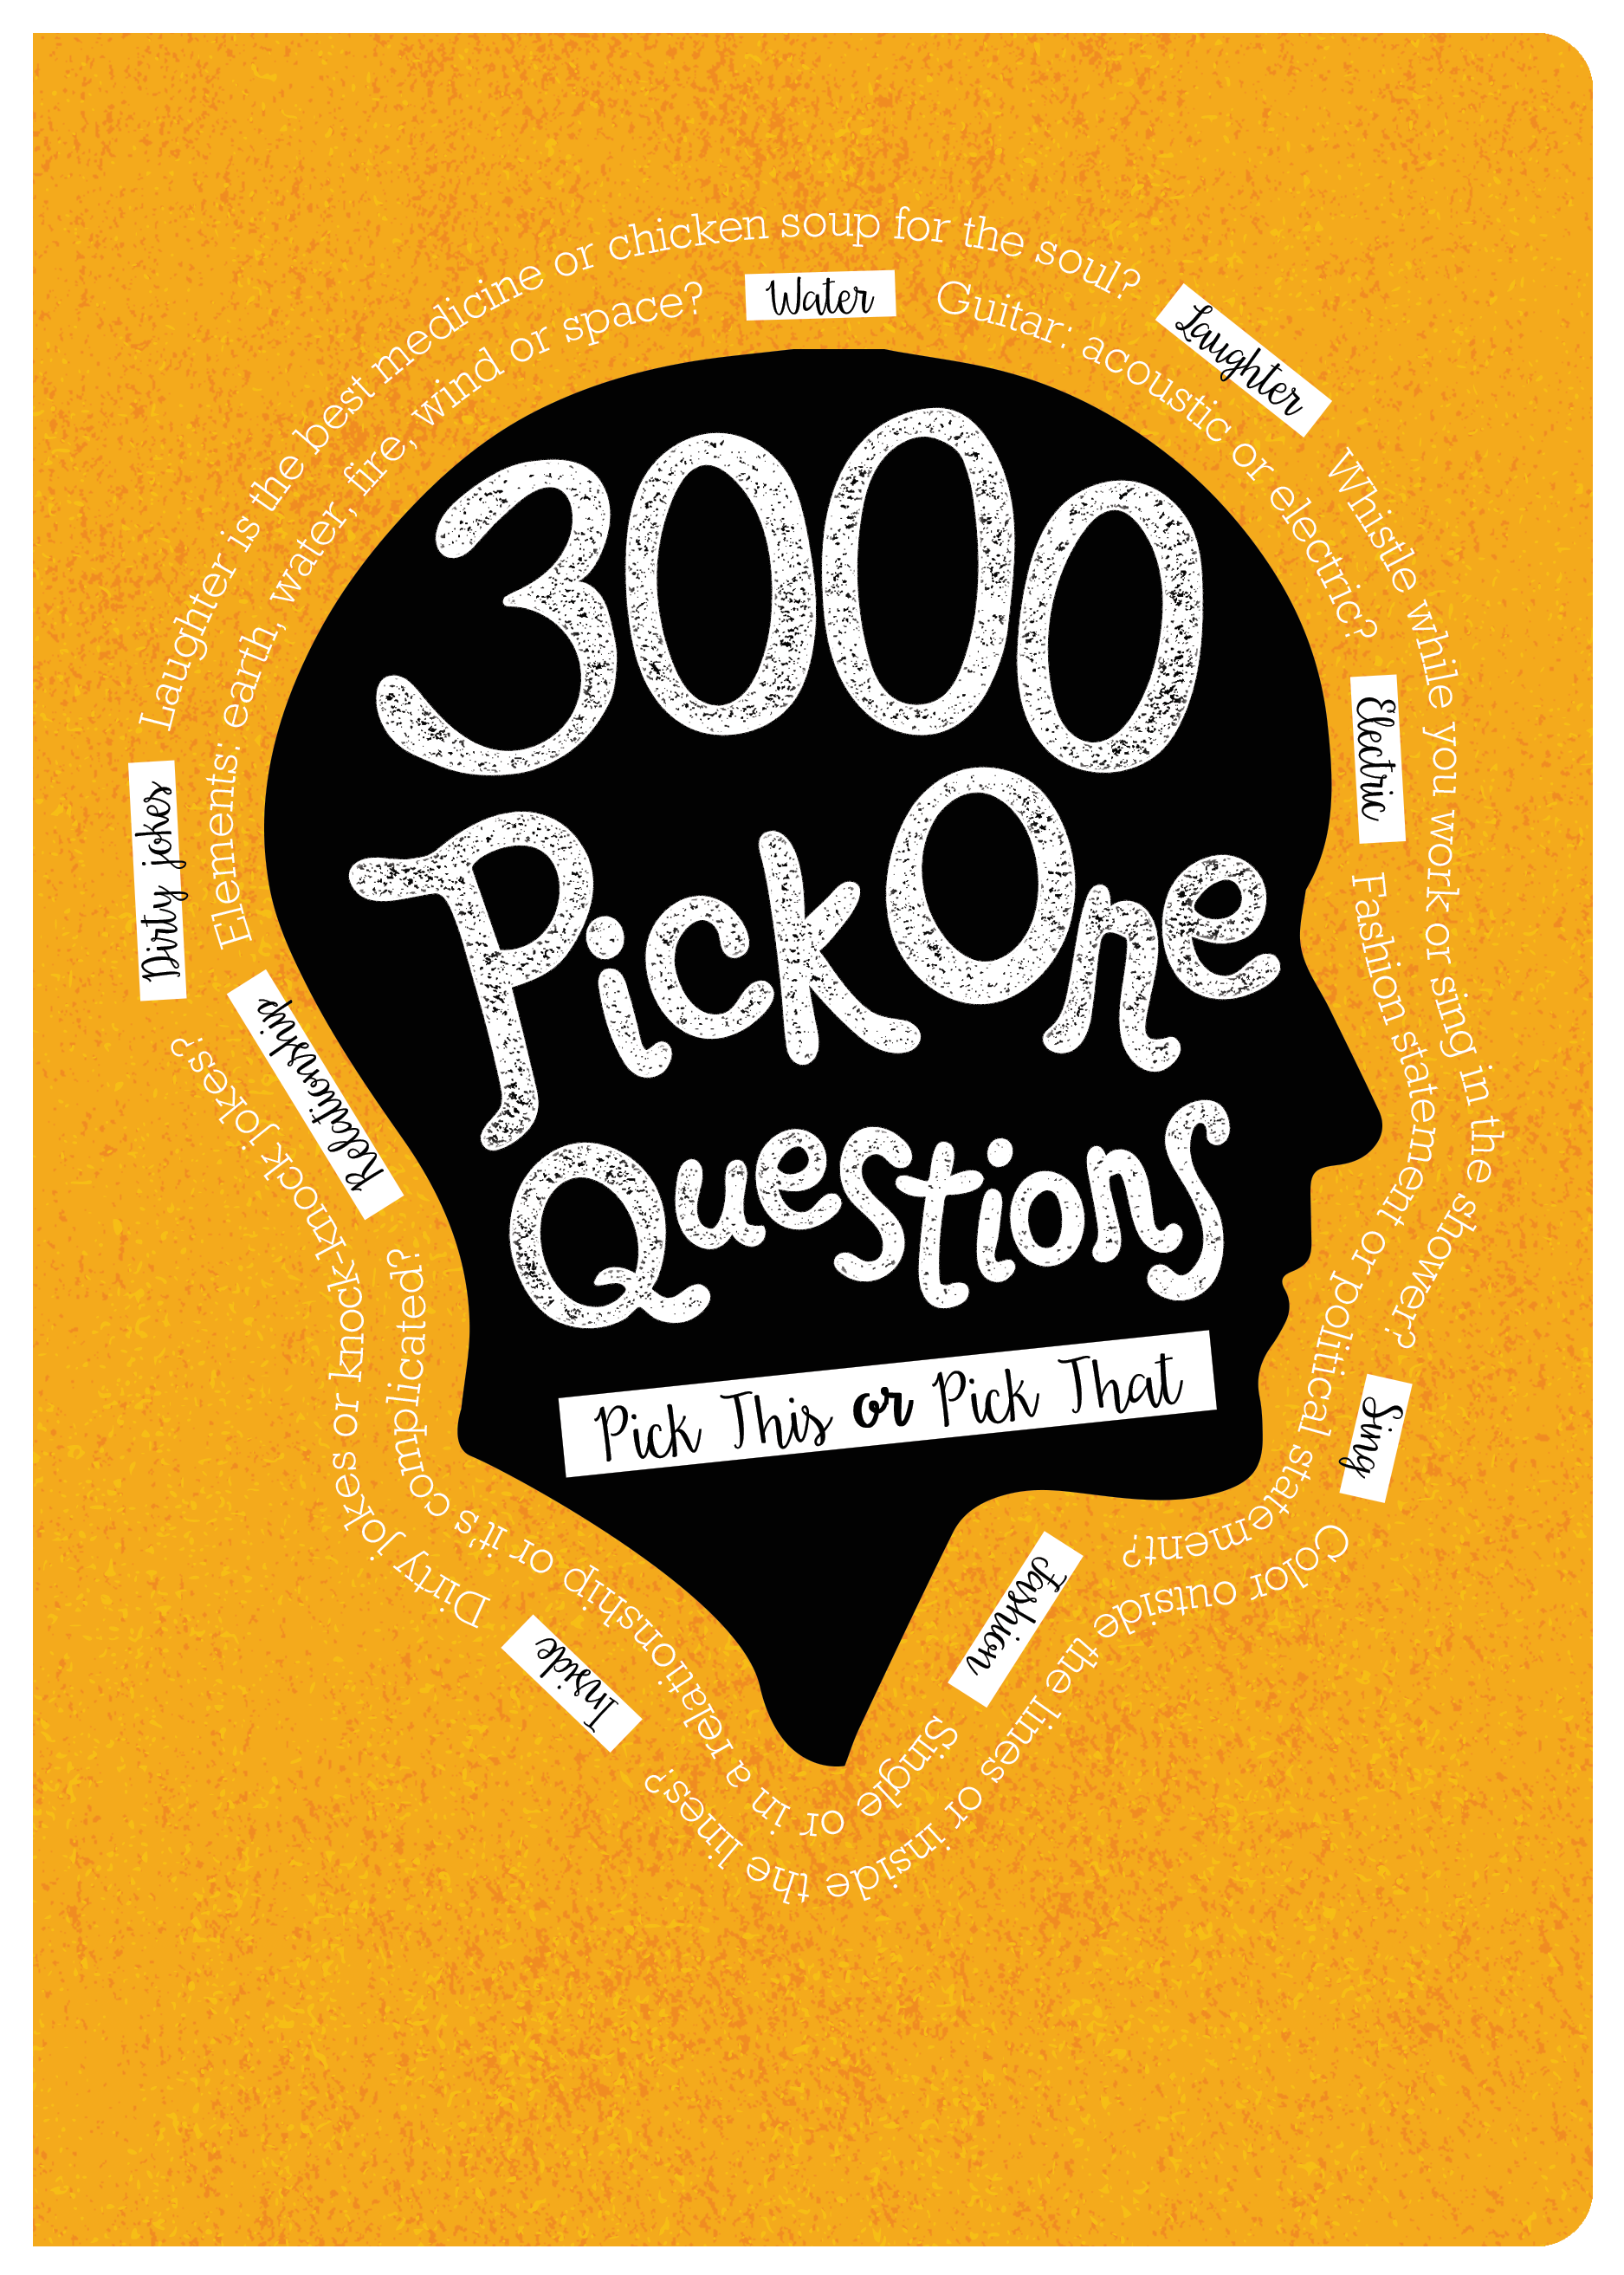 3000 Pick One Questions